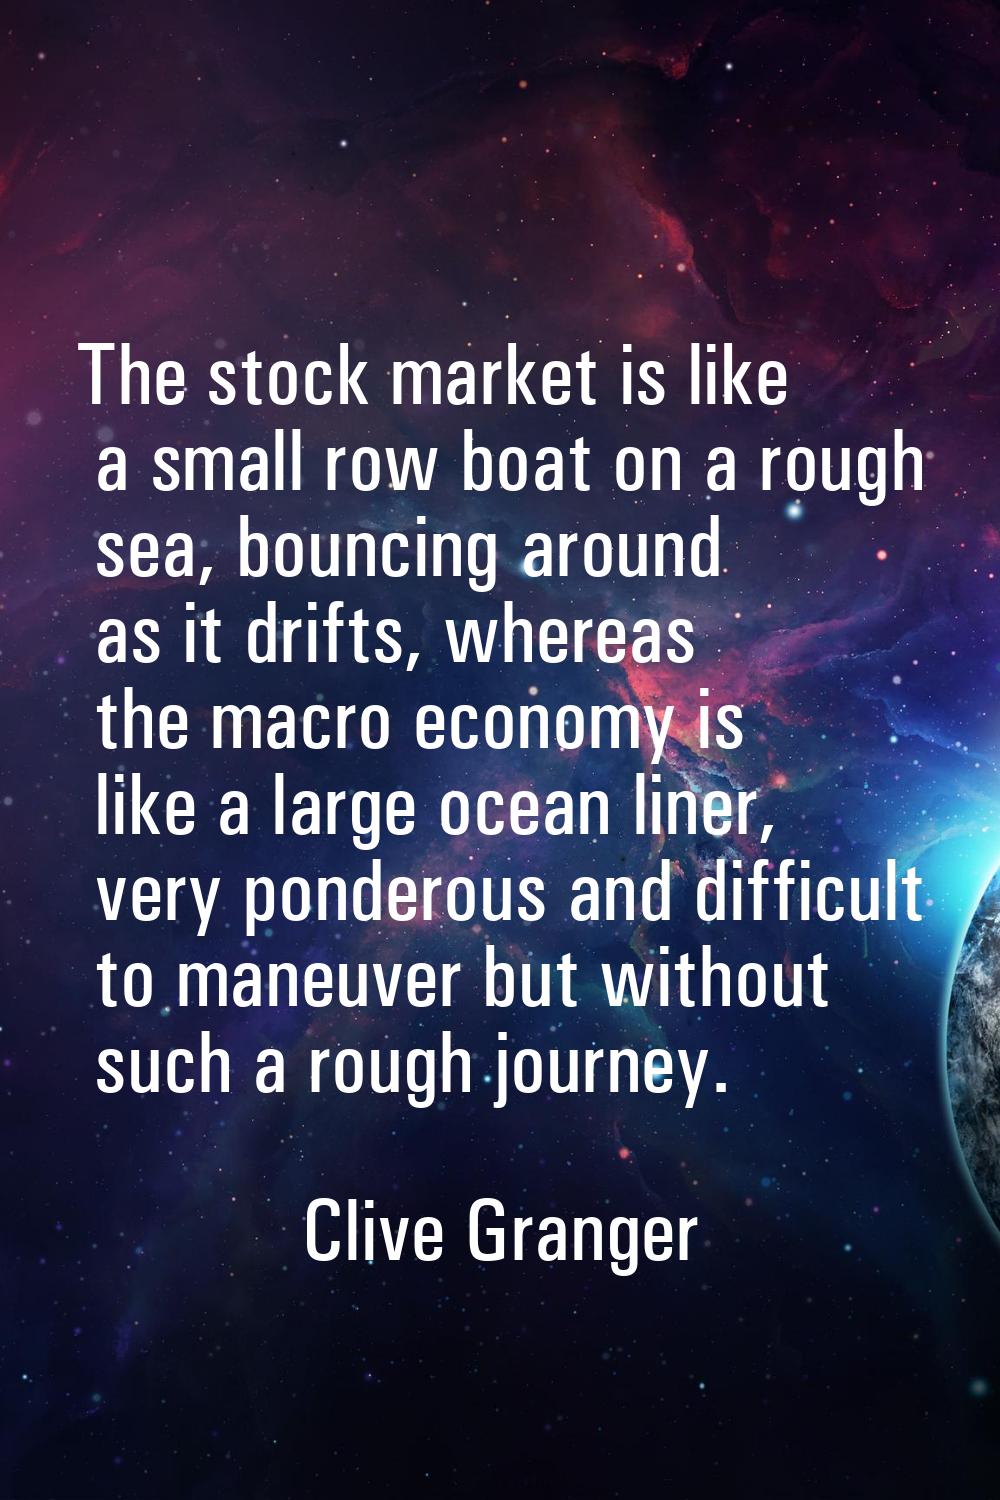 The stock market is like a small row boat on a rough sea, bouncing around as it drifts, whereas the